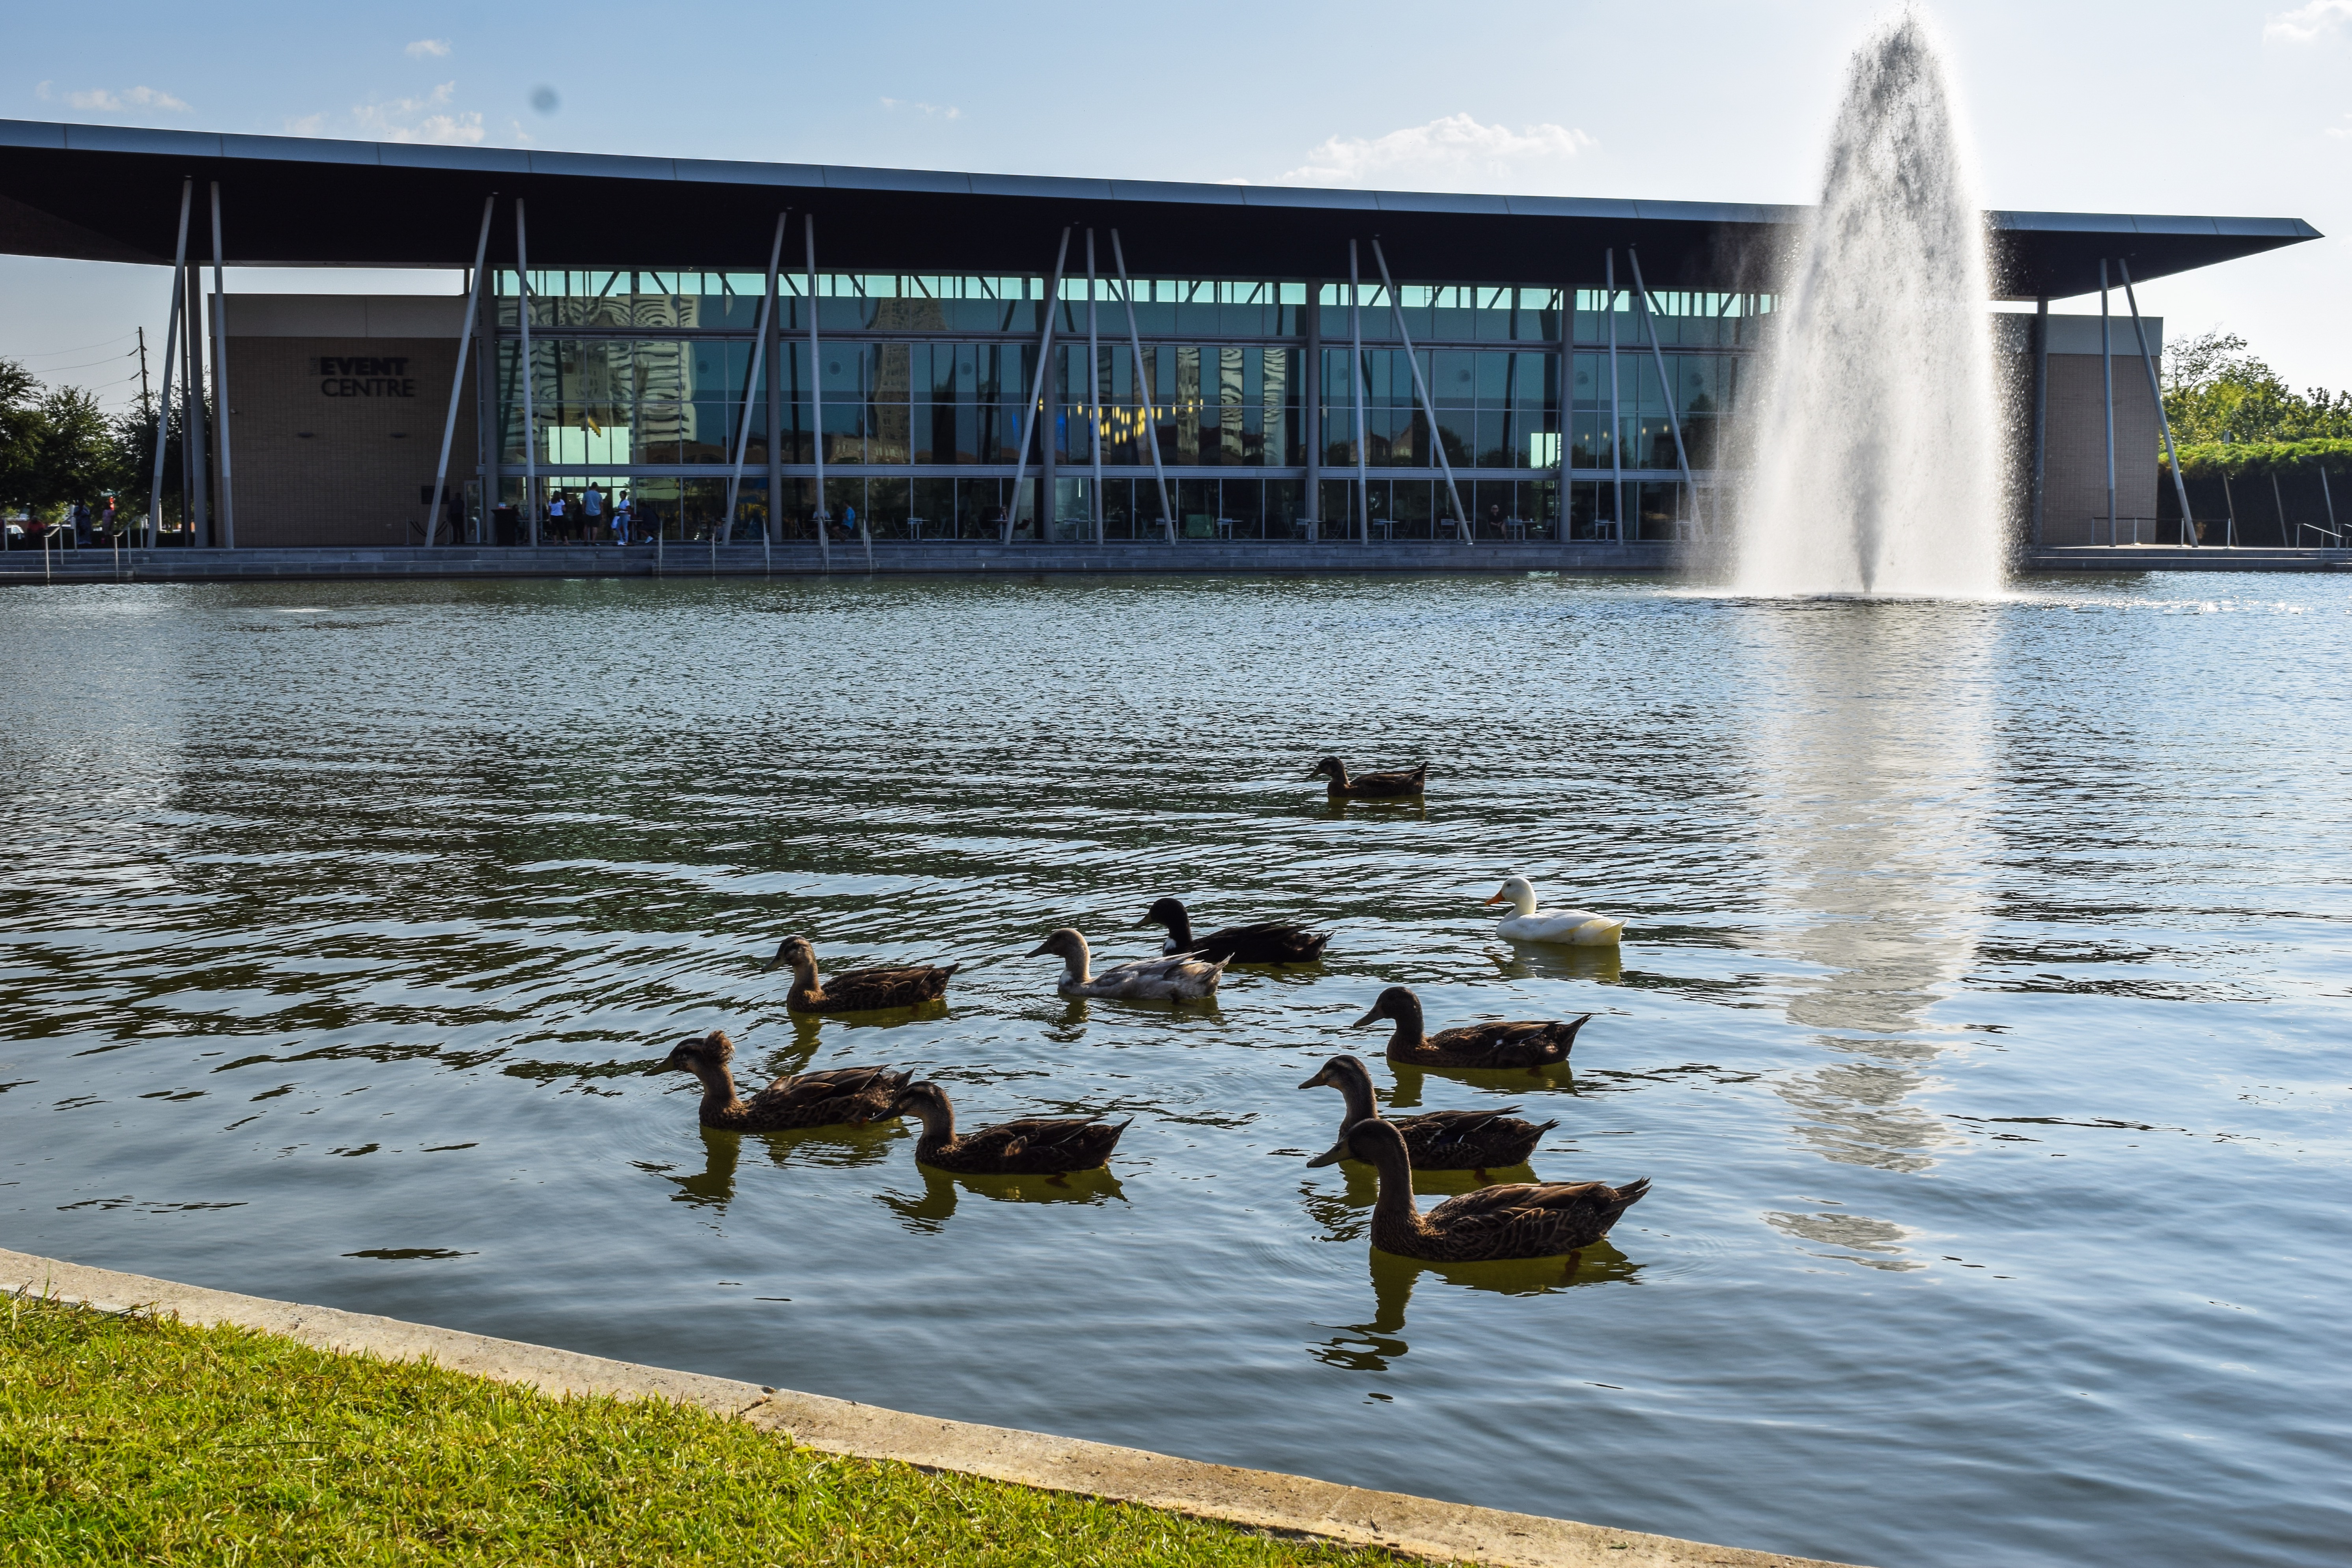 Ducks In The Pond In Front Of The Event Centre